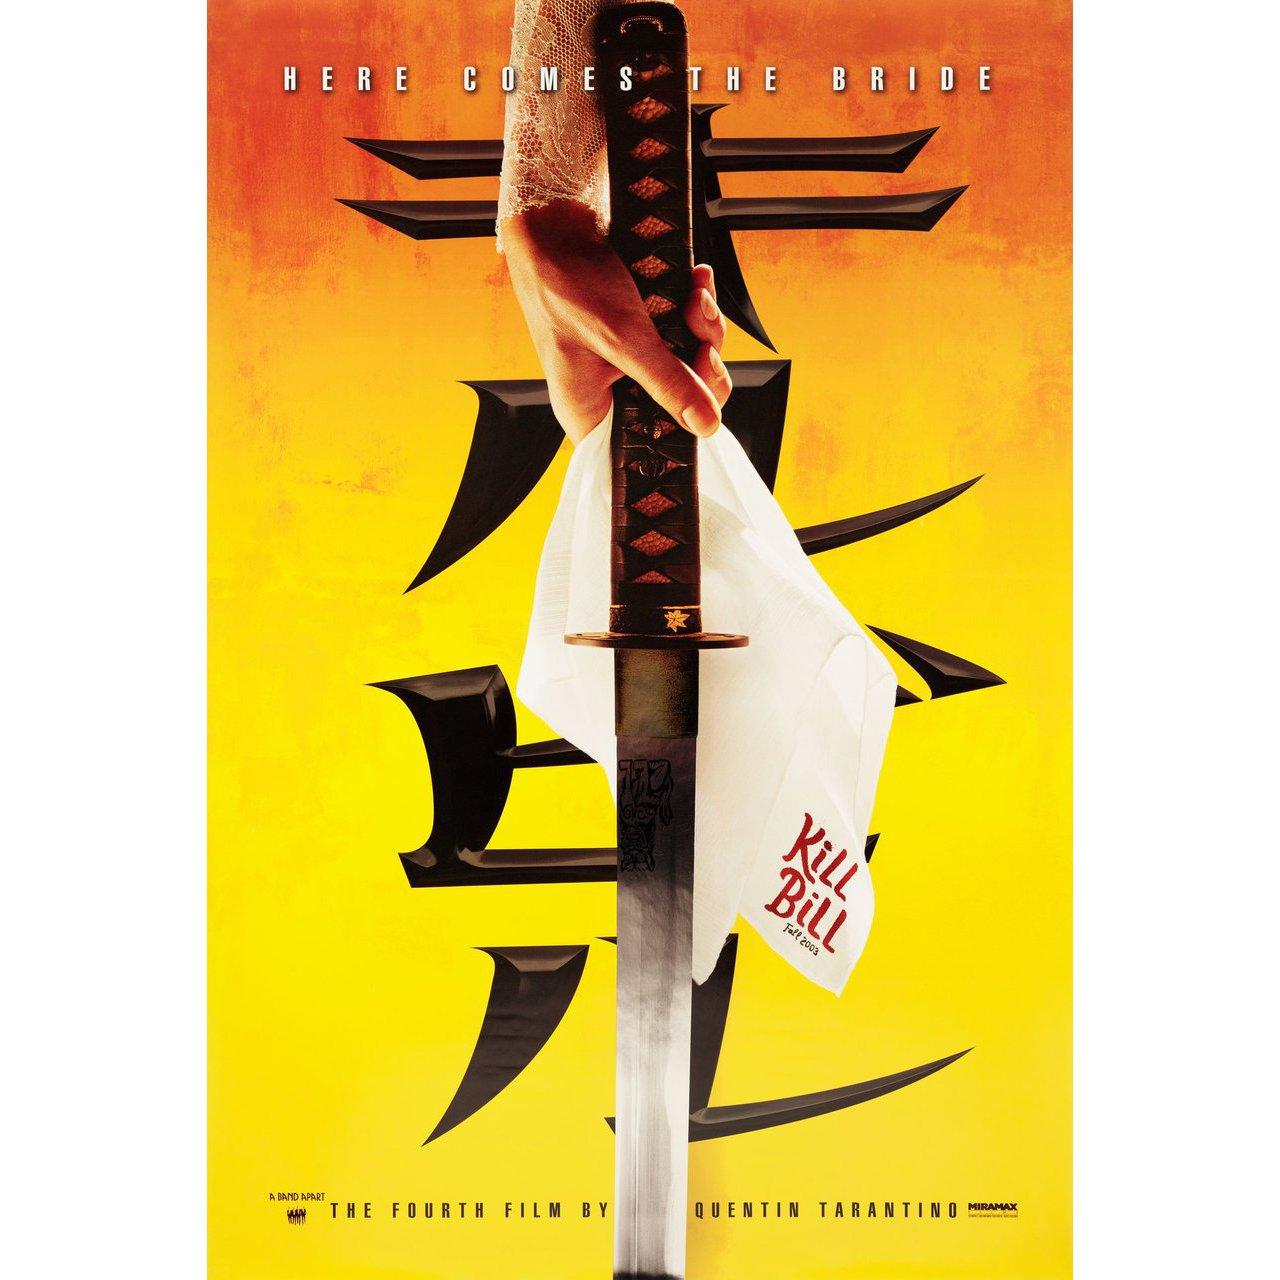 Kill Bill: Vol. 1 2003 U.S. One Sheet Film Poster In Good Condition In New York, NY